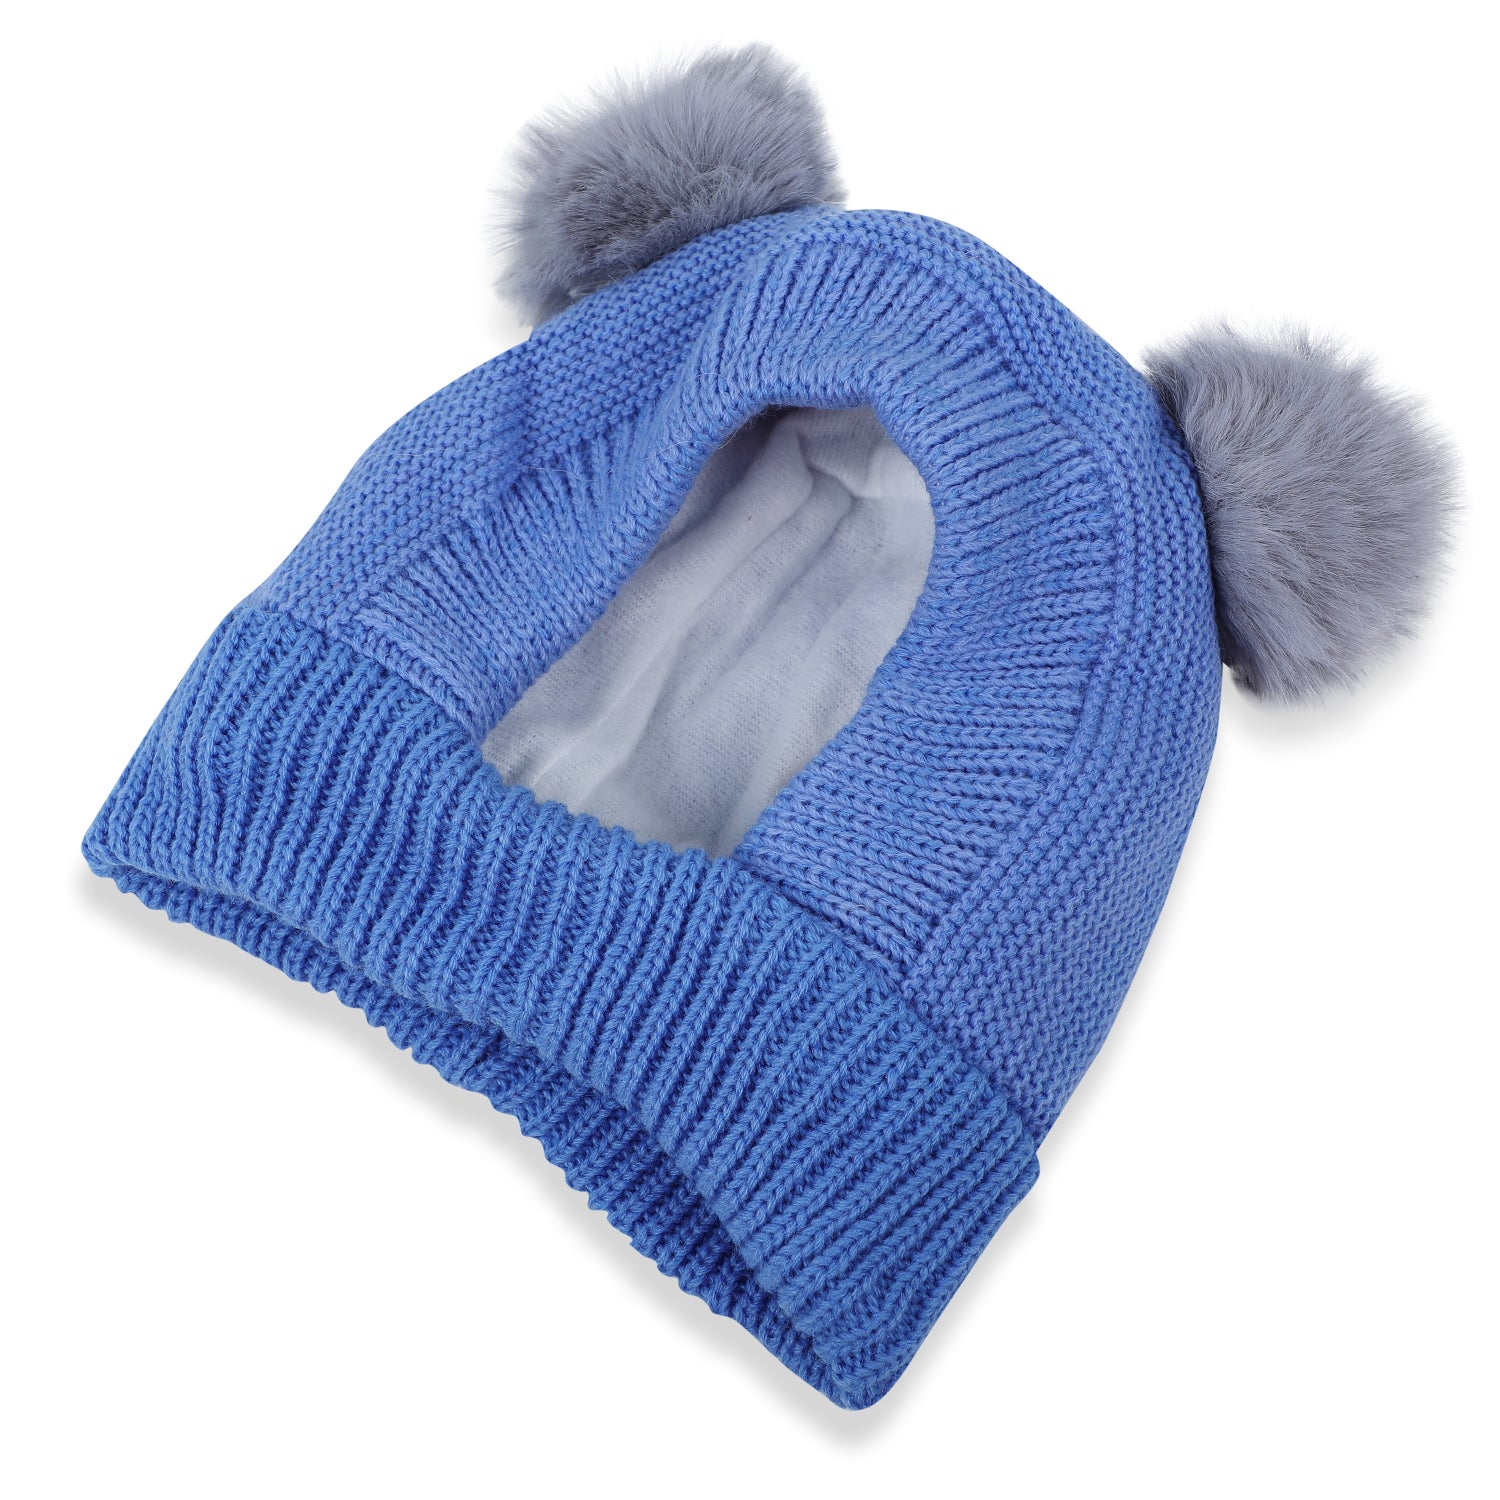 Baby Moo Adorable Pom Pom Knitted Beanie Woollen Cap - Blue - Baby Moo